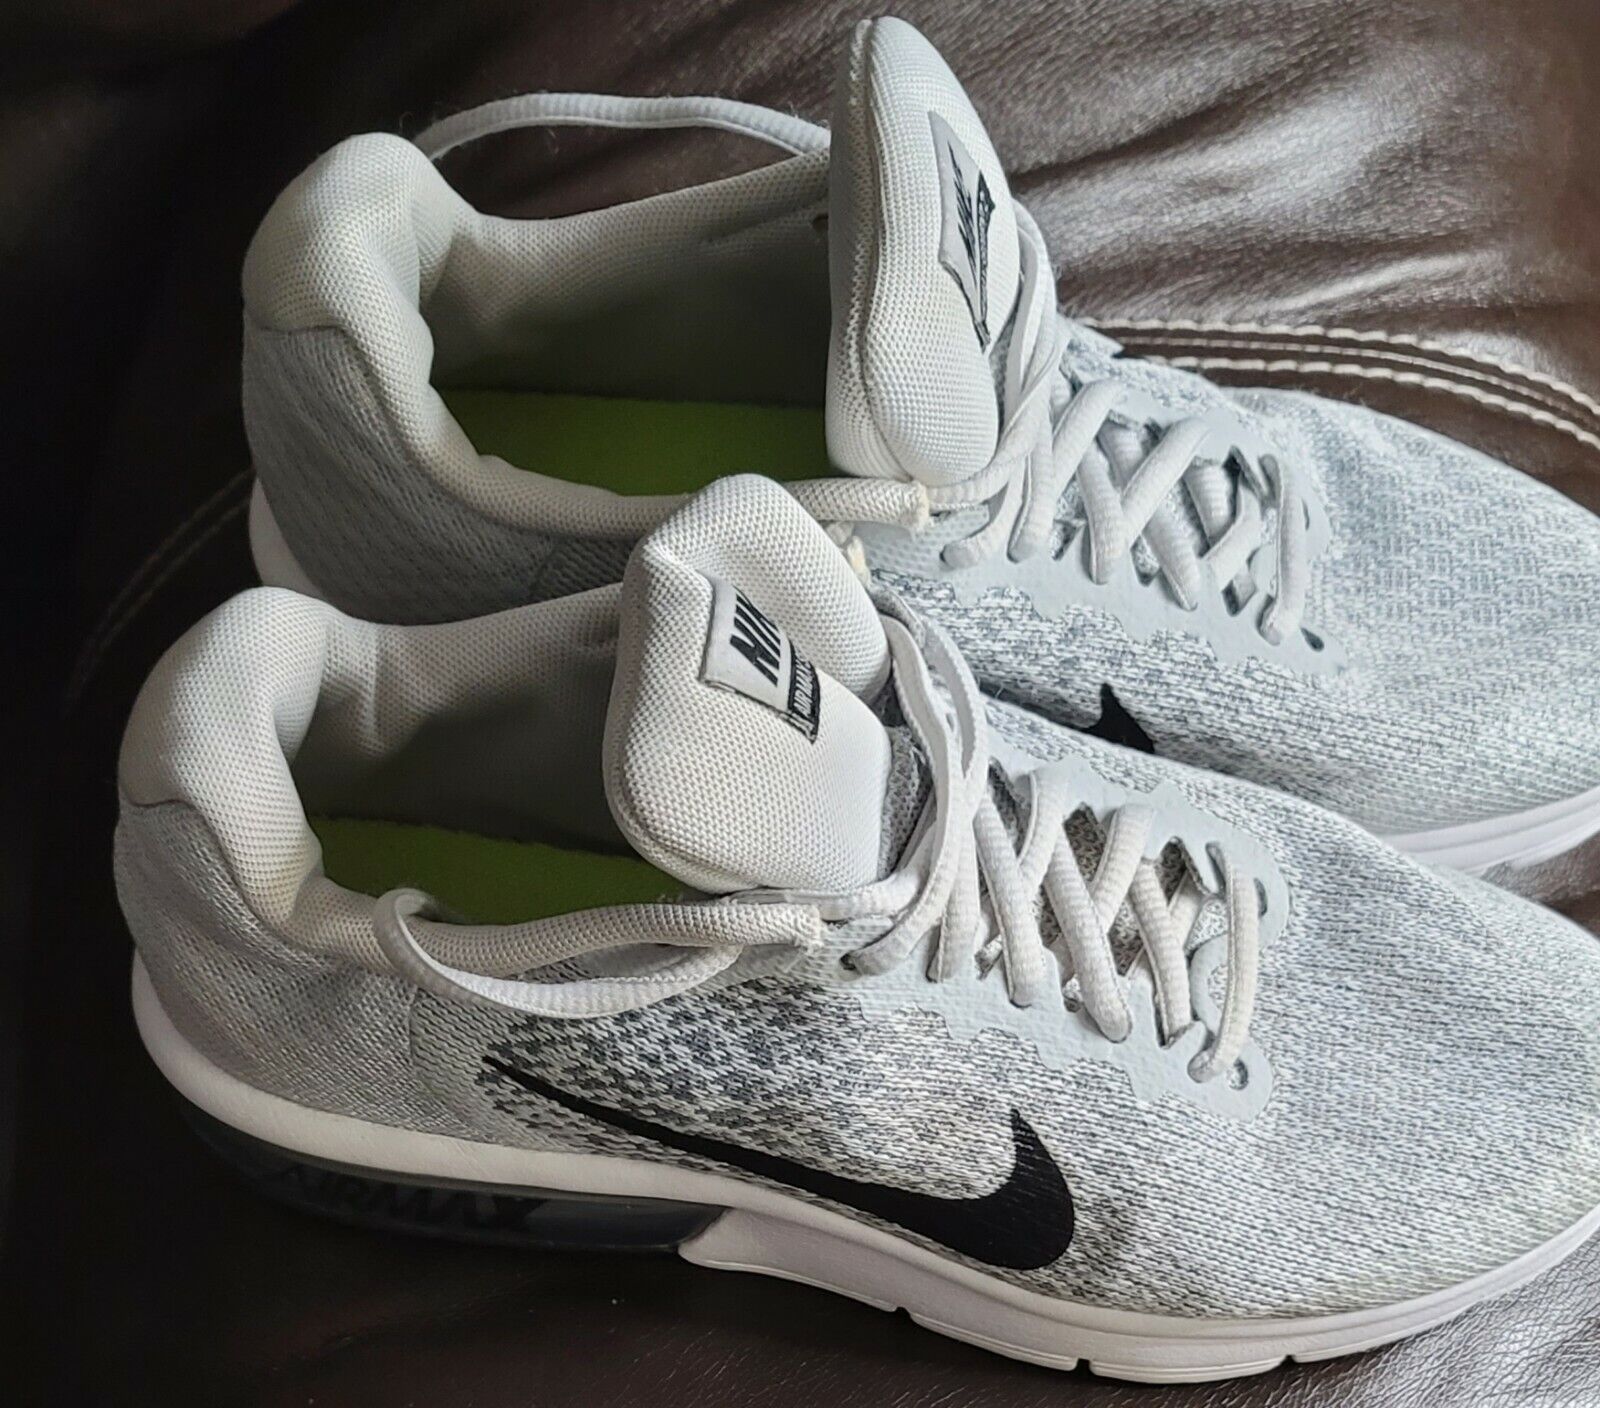 nike air max sequent 2 Gray Black Teen Size 6y | eBay